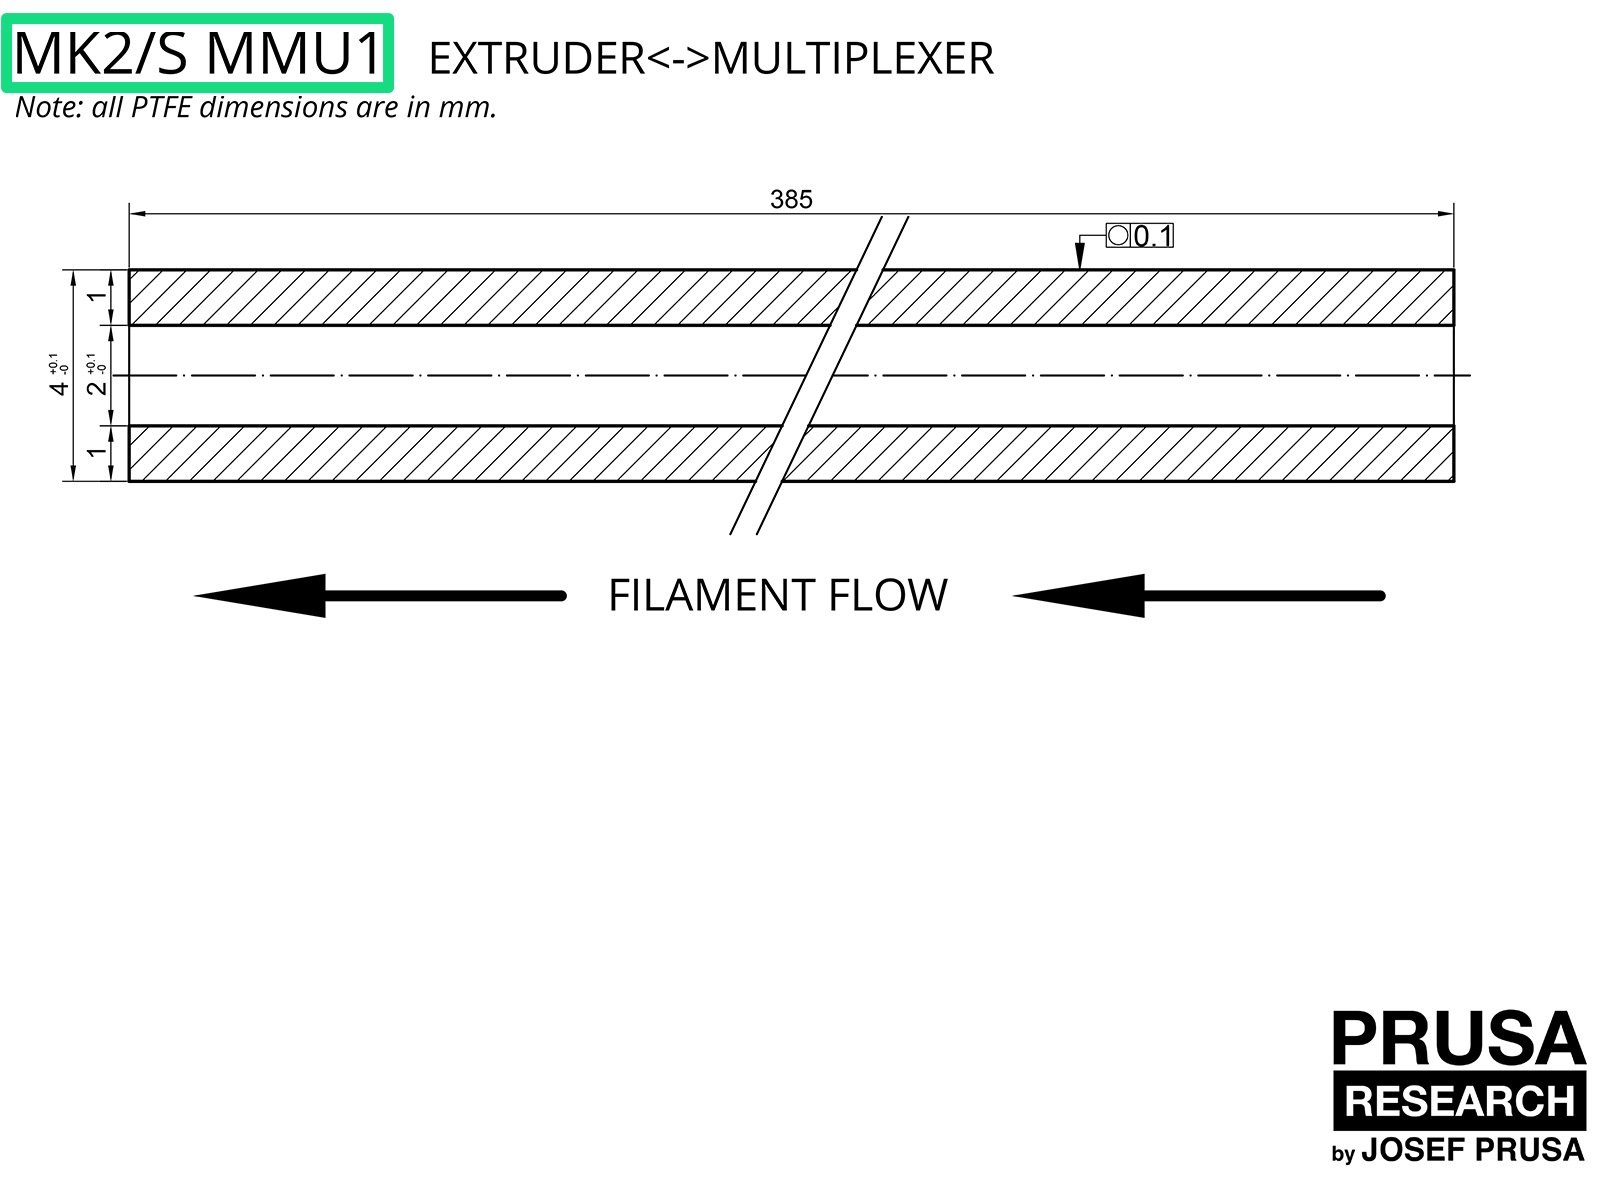 OBSOLETE: PTFE for the MK2/S MMU1